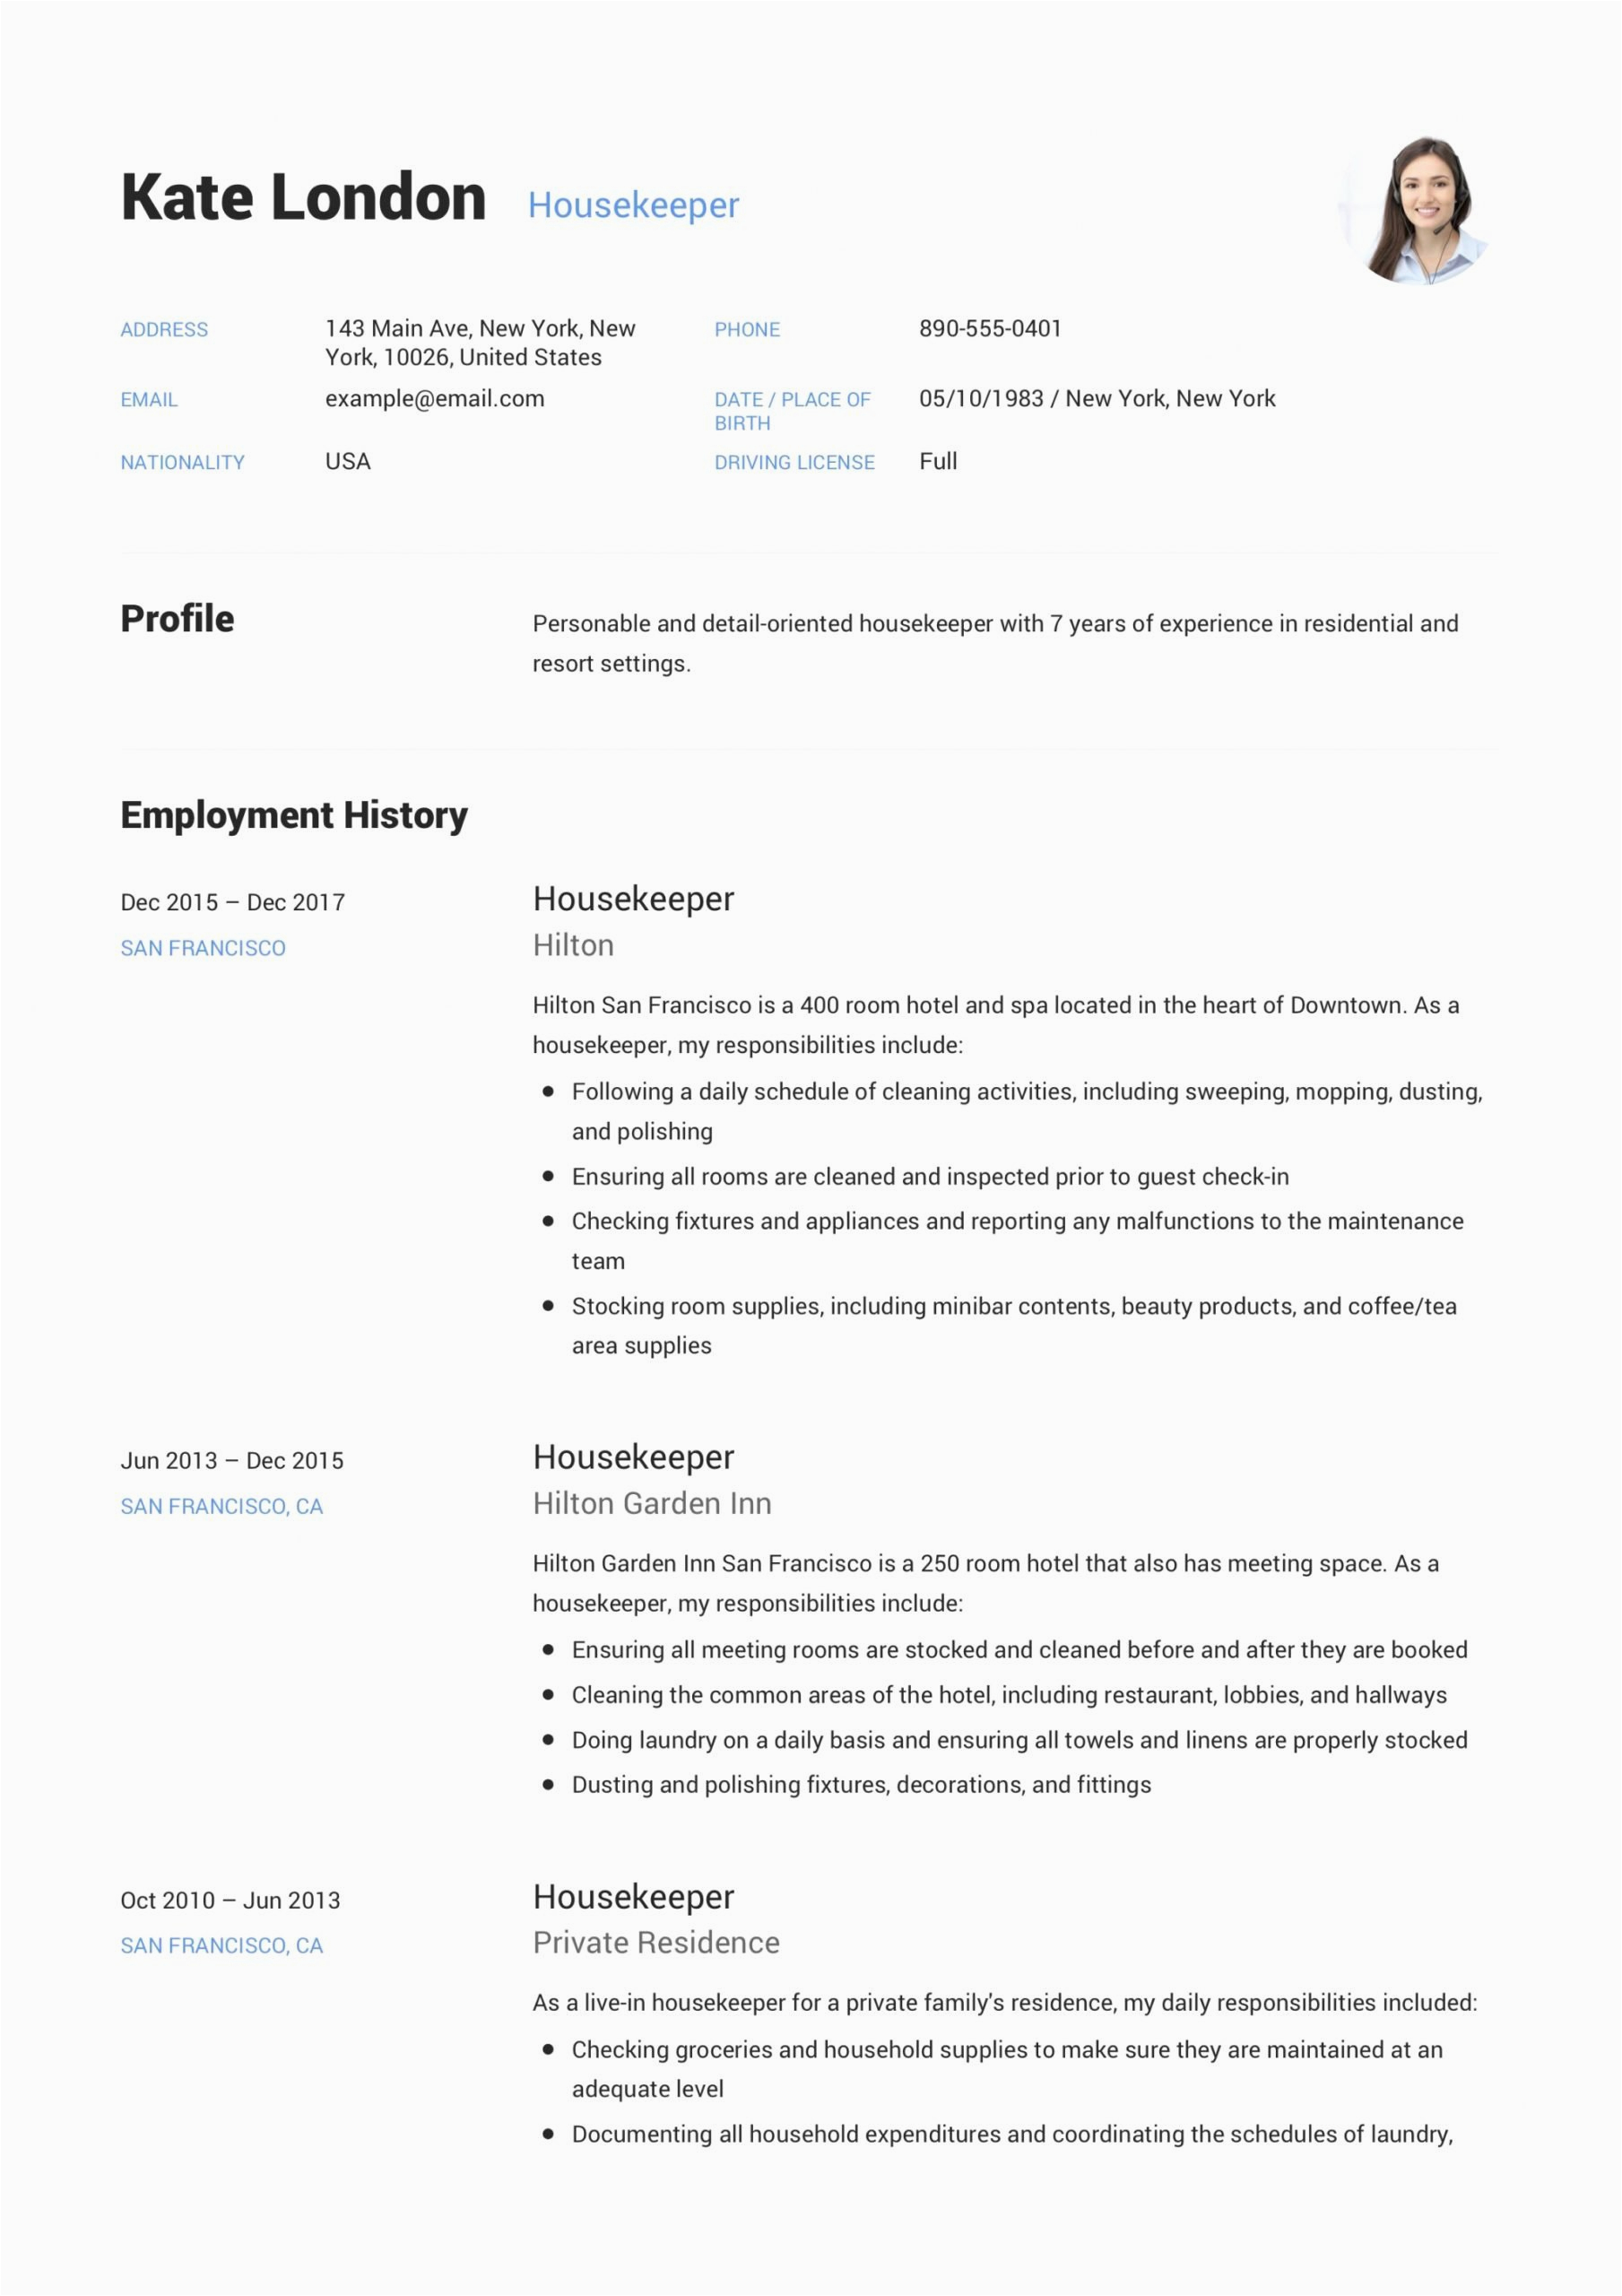 Sample Resume for Housekeeping with No Experience Housekeeping Resume with No Experience™